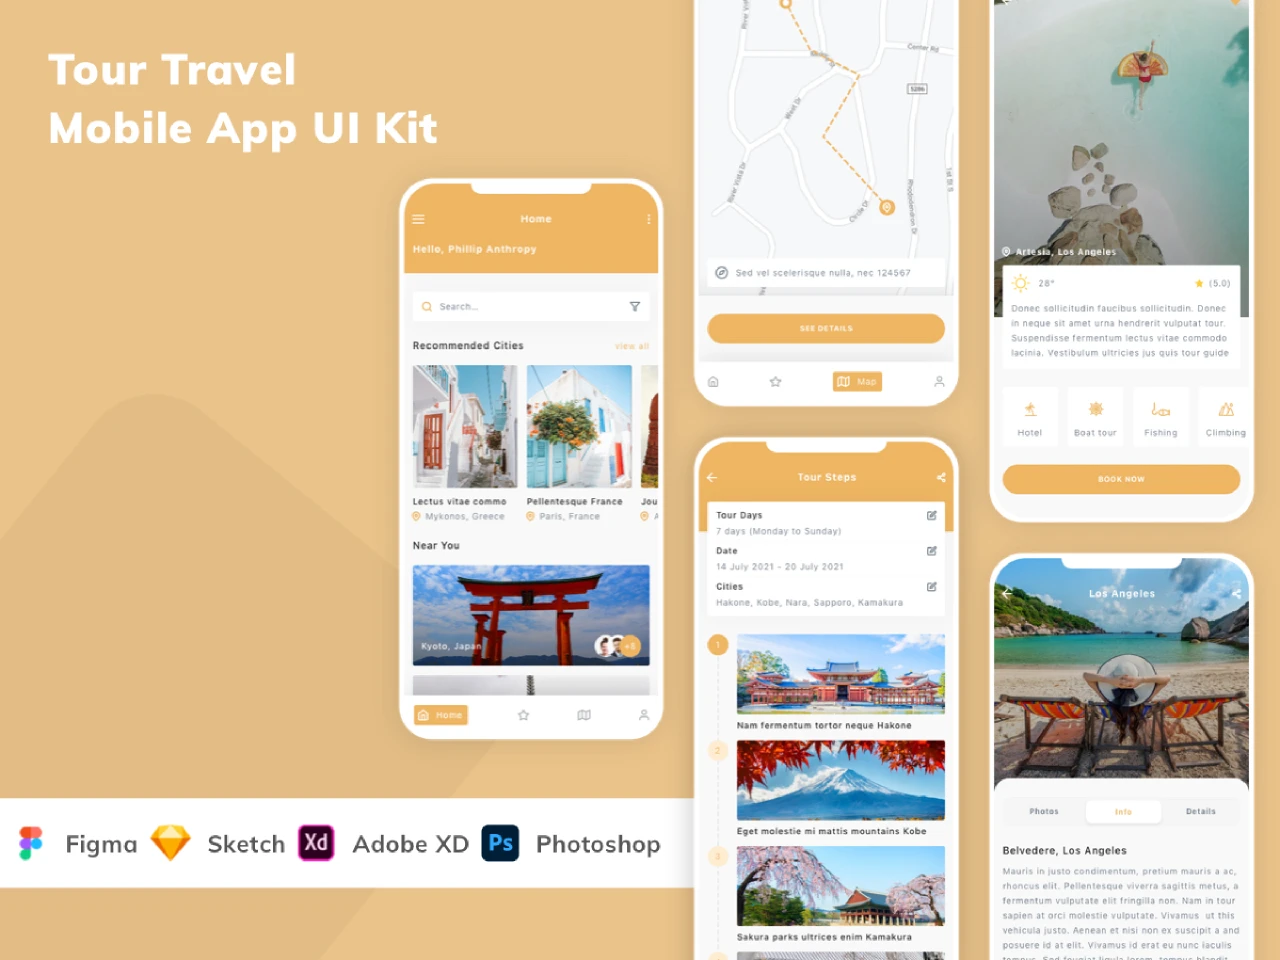 Tour Travel Mobile App UI Kit for Figma and Adobe XD